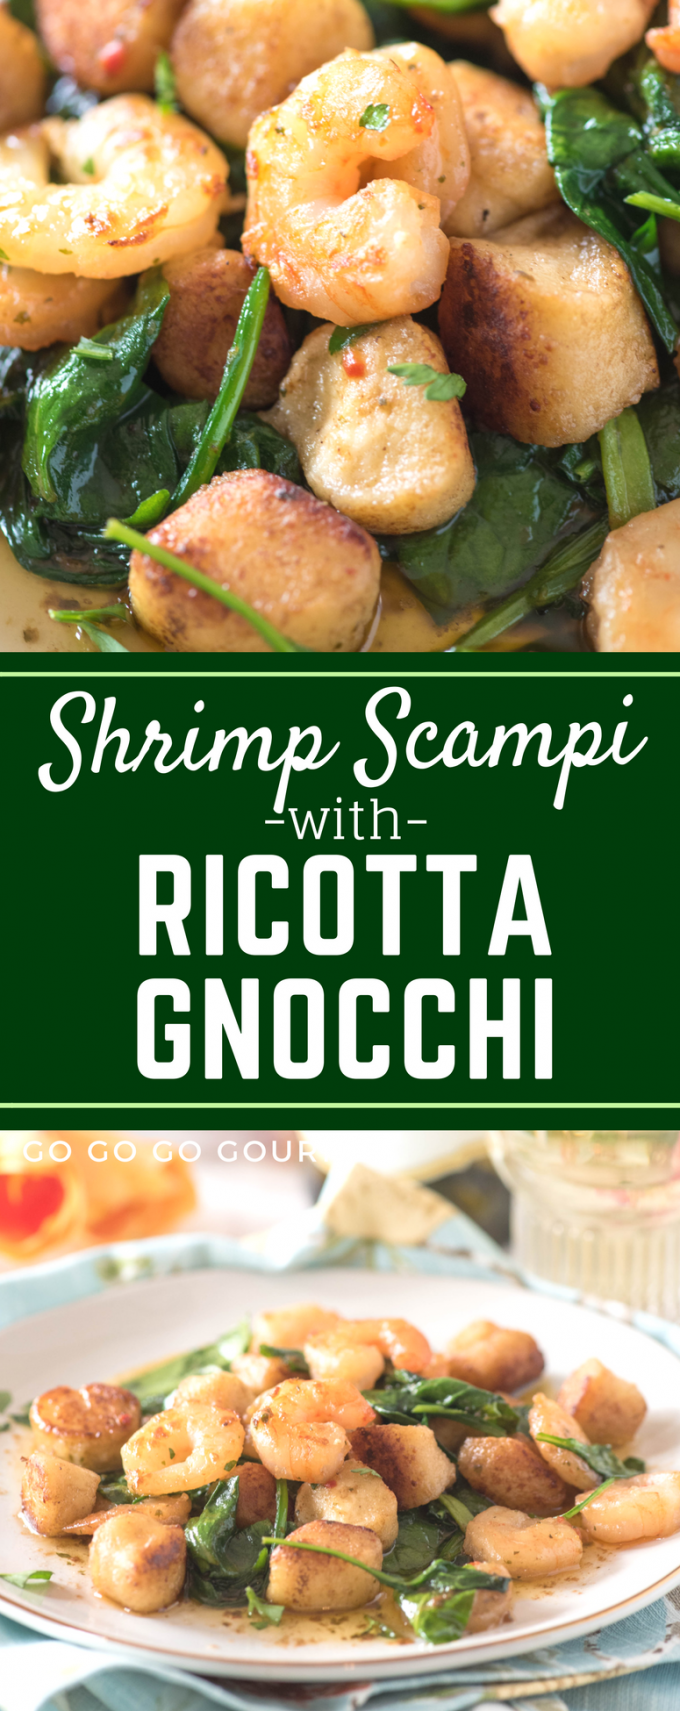 This Shrimp Scampi with easy homemade ricotta gnocchi is out of this world! Super buttery and garlicky, this semi-homemade dish is the perfect weeknight trip to Italy! #shrimp #Pasta #italianrecipes #italianfood via @gogogogourmet